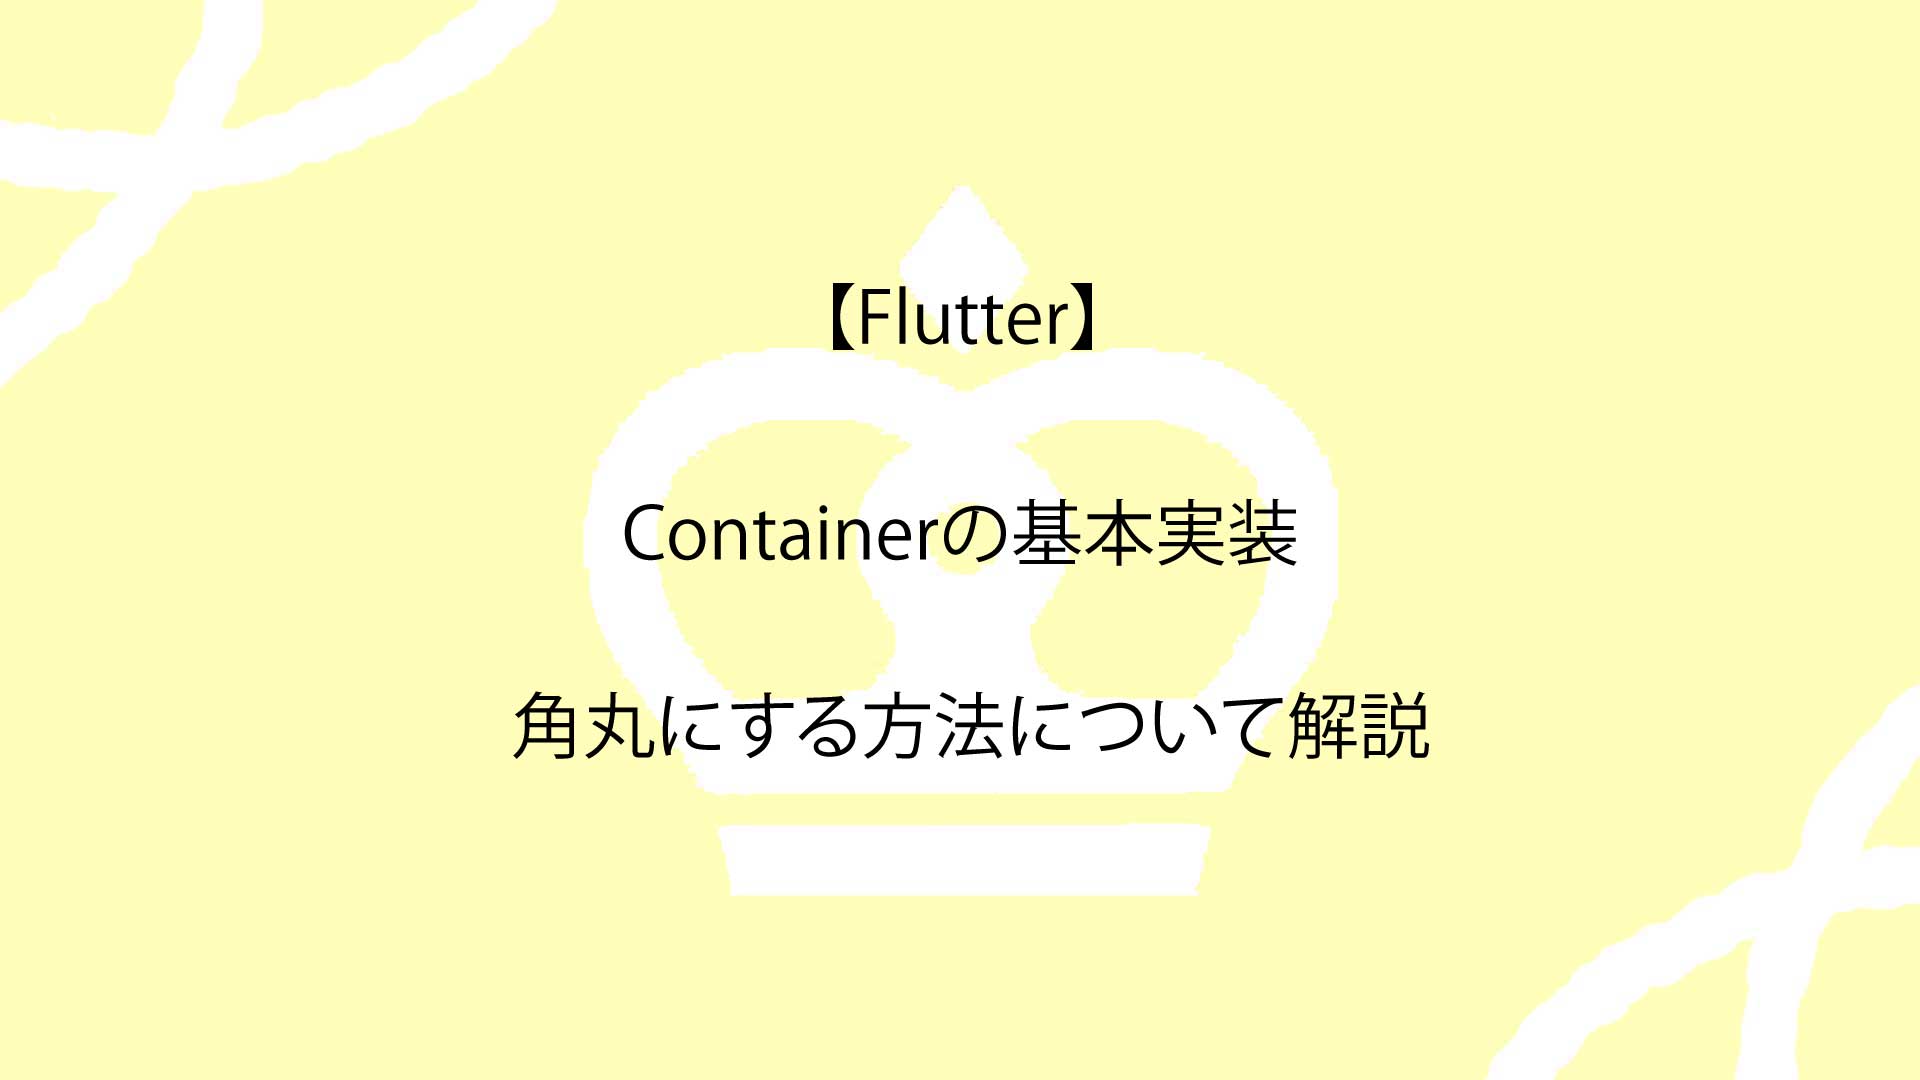 【Flutter】Containerの基本実装から角丸にする方法について解説